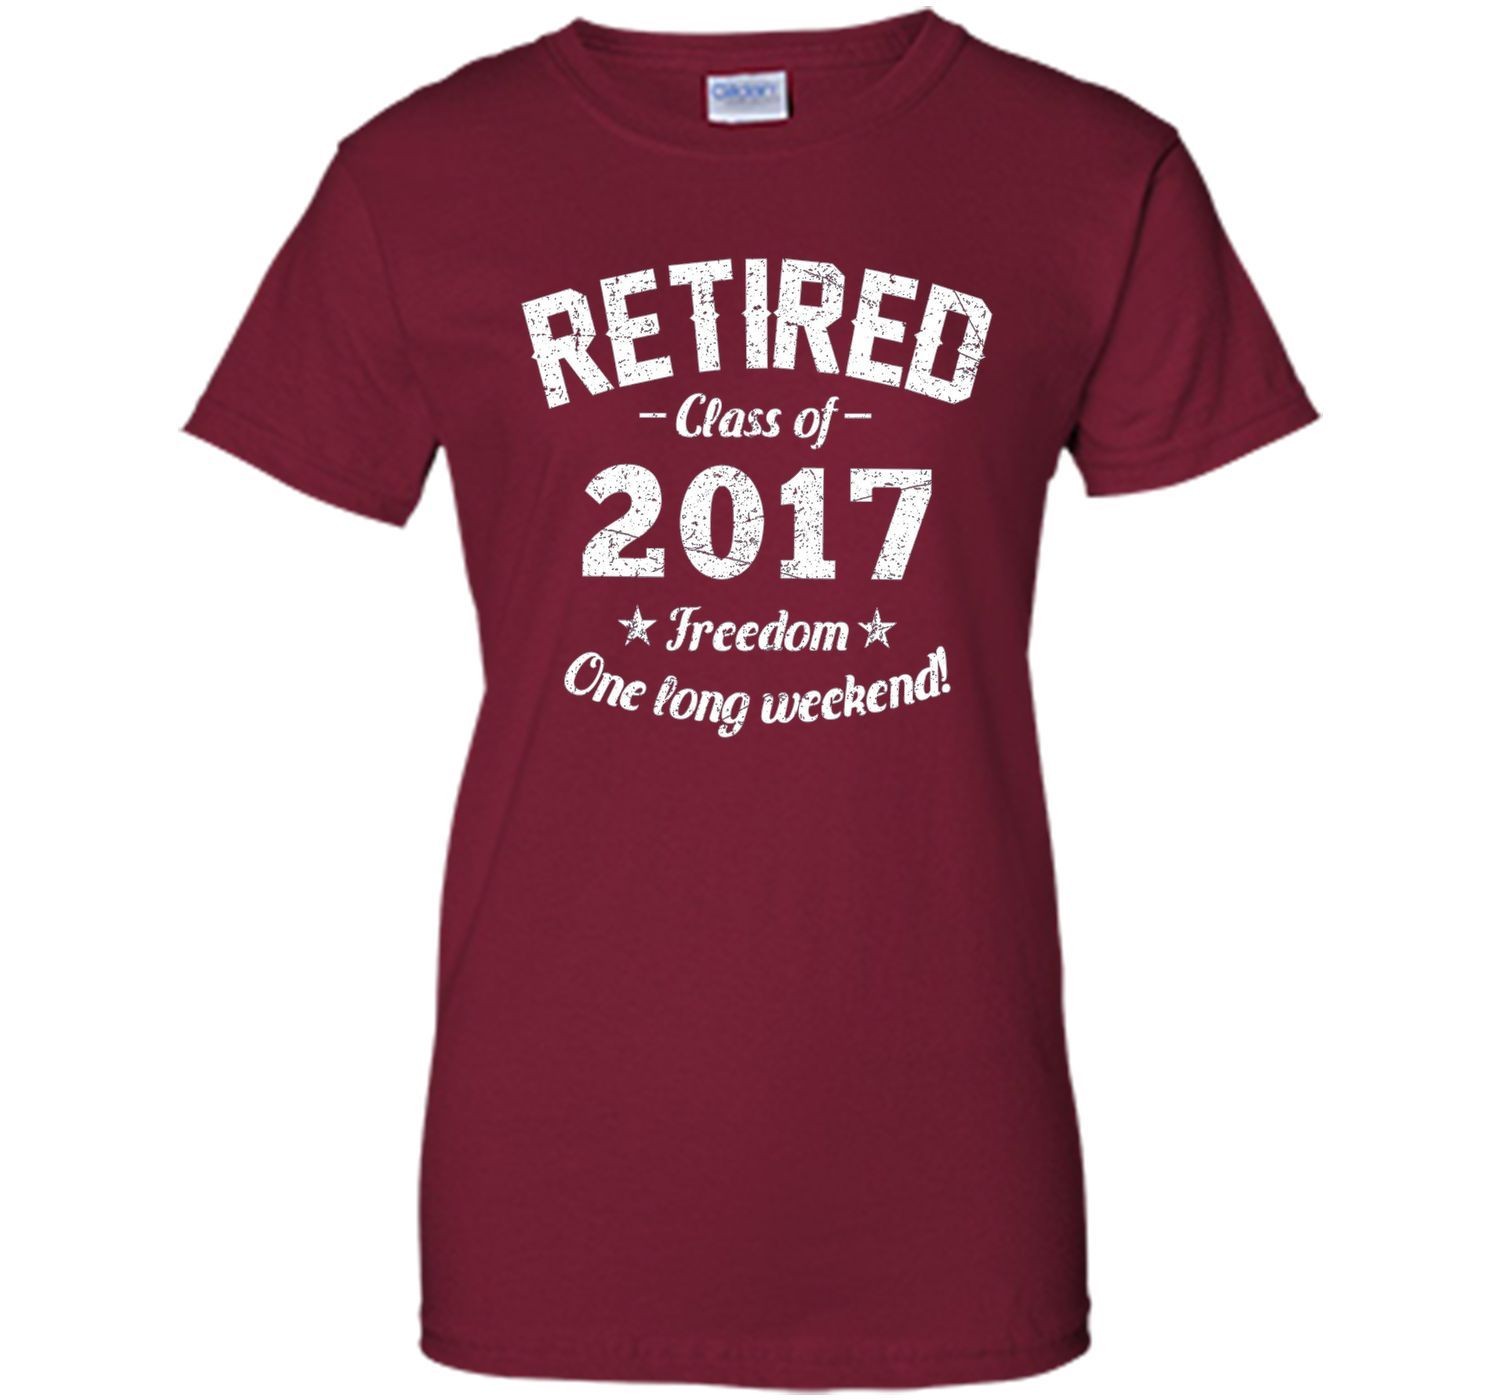 Imported Machine wash cold with like colors dry low heat Funny 2017 retirement tshirt with "Retired Class 2017 Freedom e Long Weekend" quote